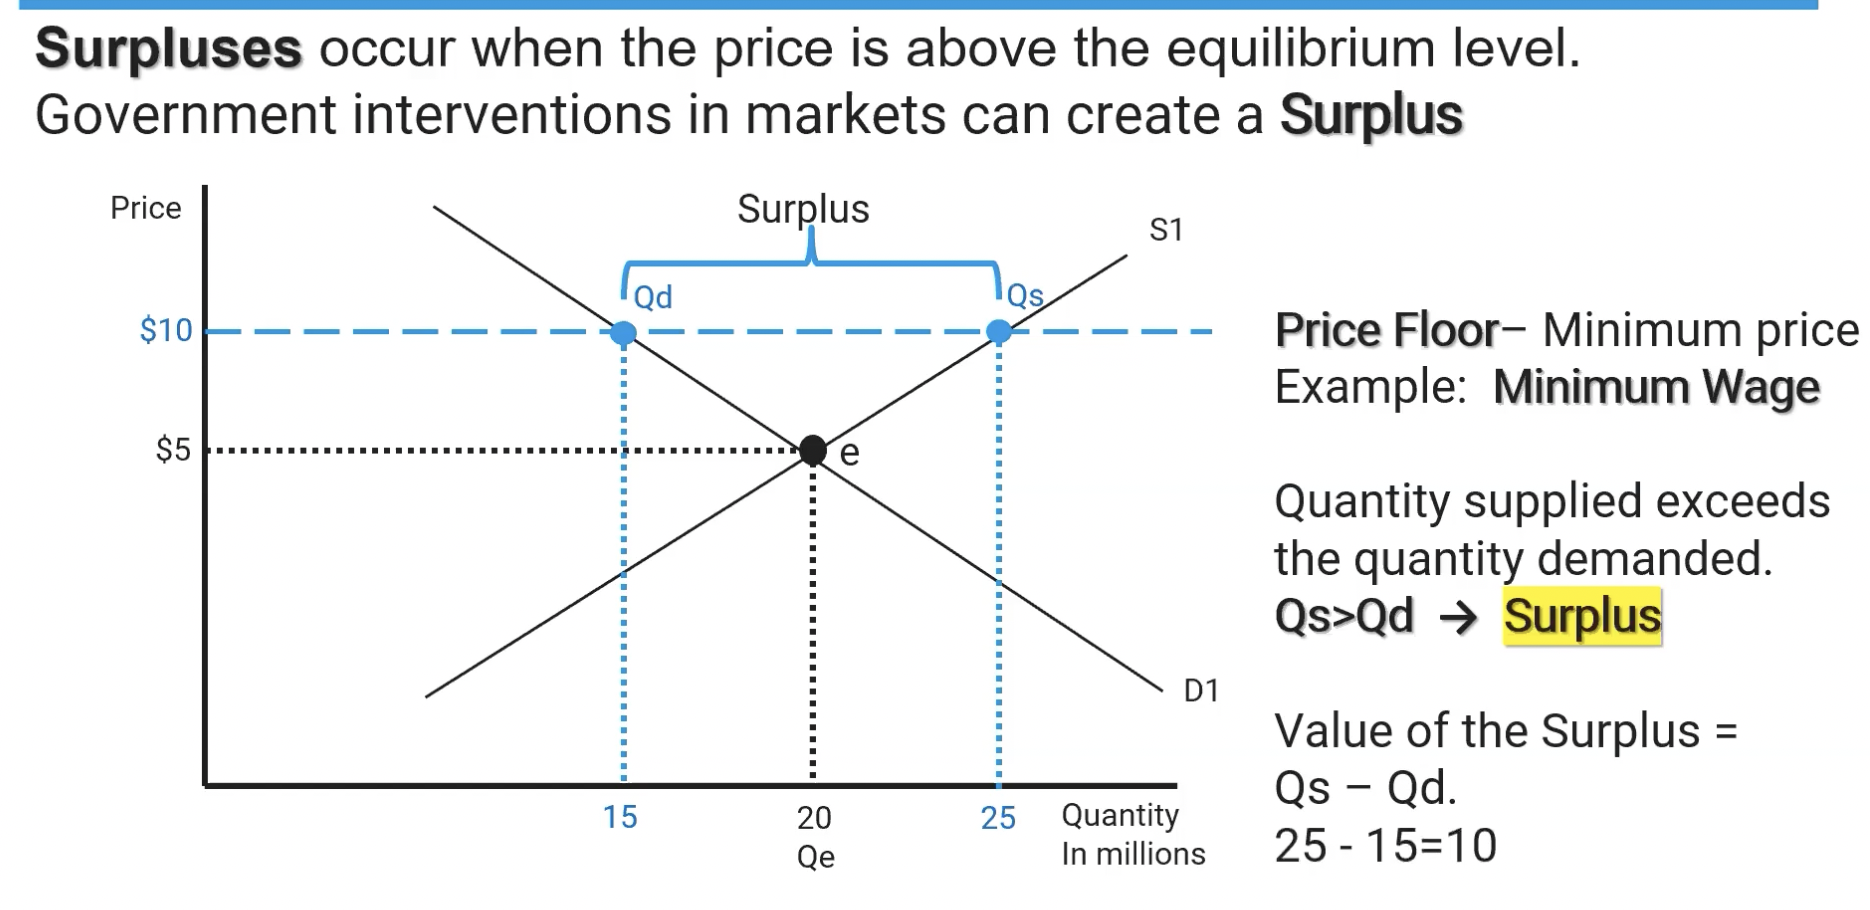 <p>Quantity supplied is greater than quantity demanded. Can be caused by a Price Floor being instituted by the government</p>